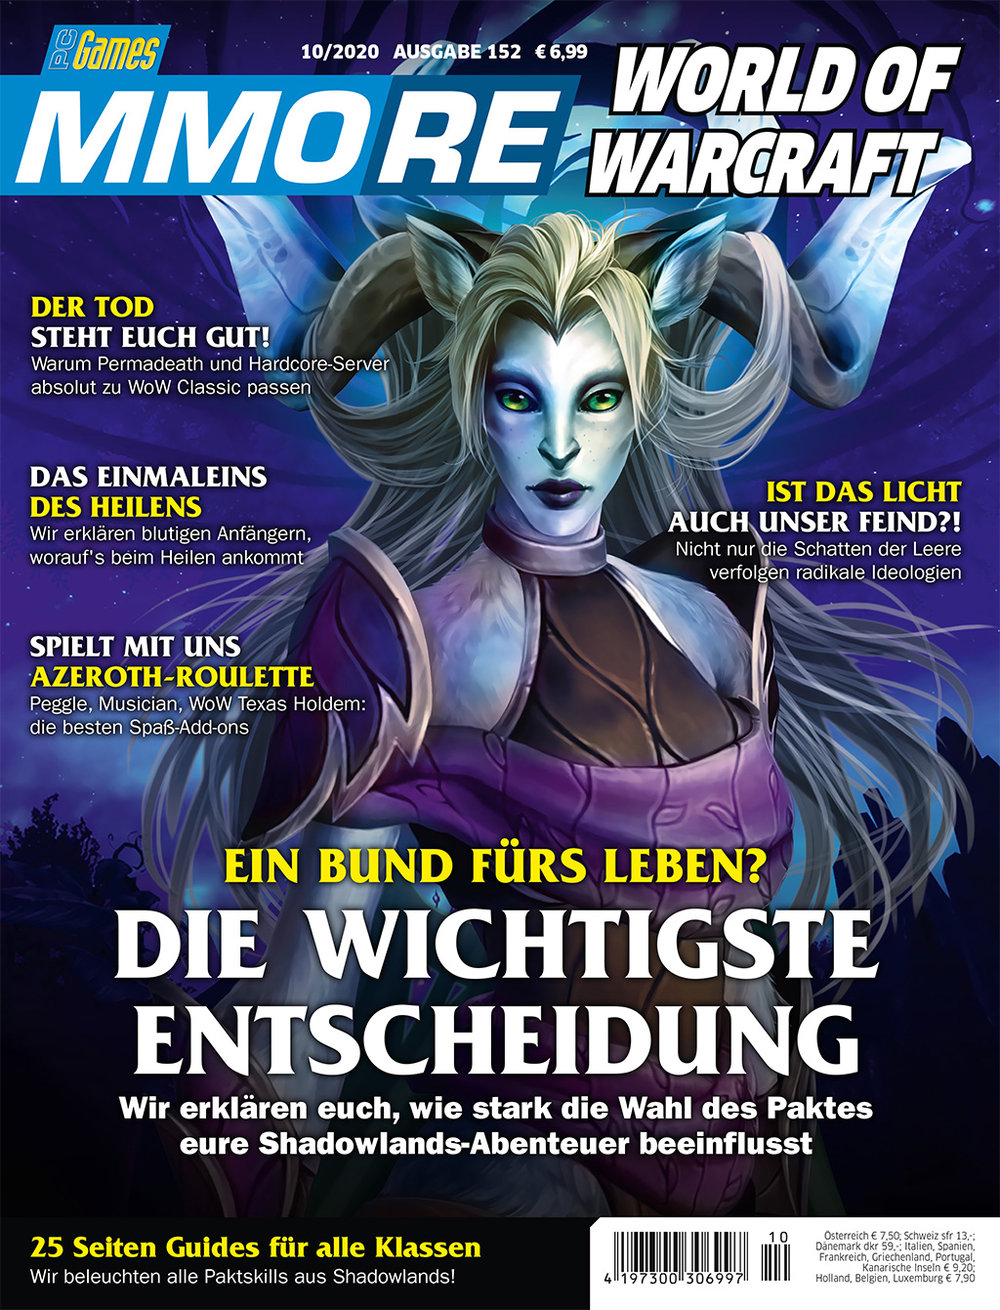 PC Games MMORE ePaper 10/2020